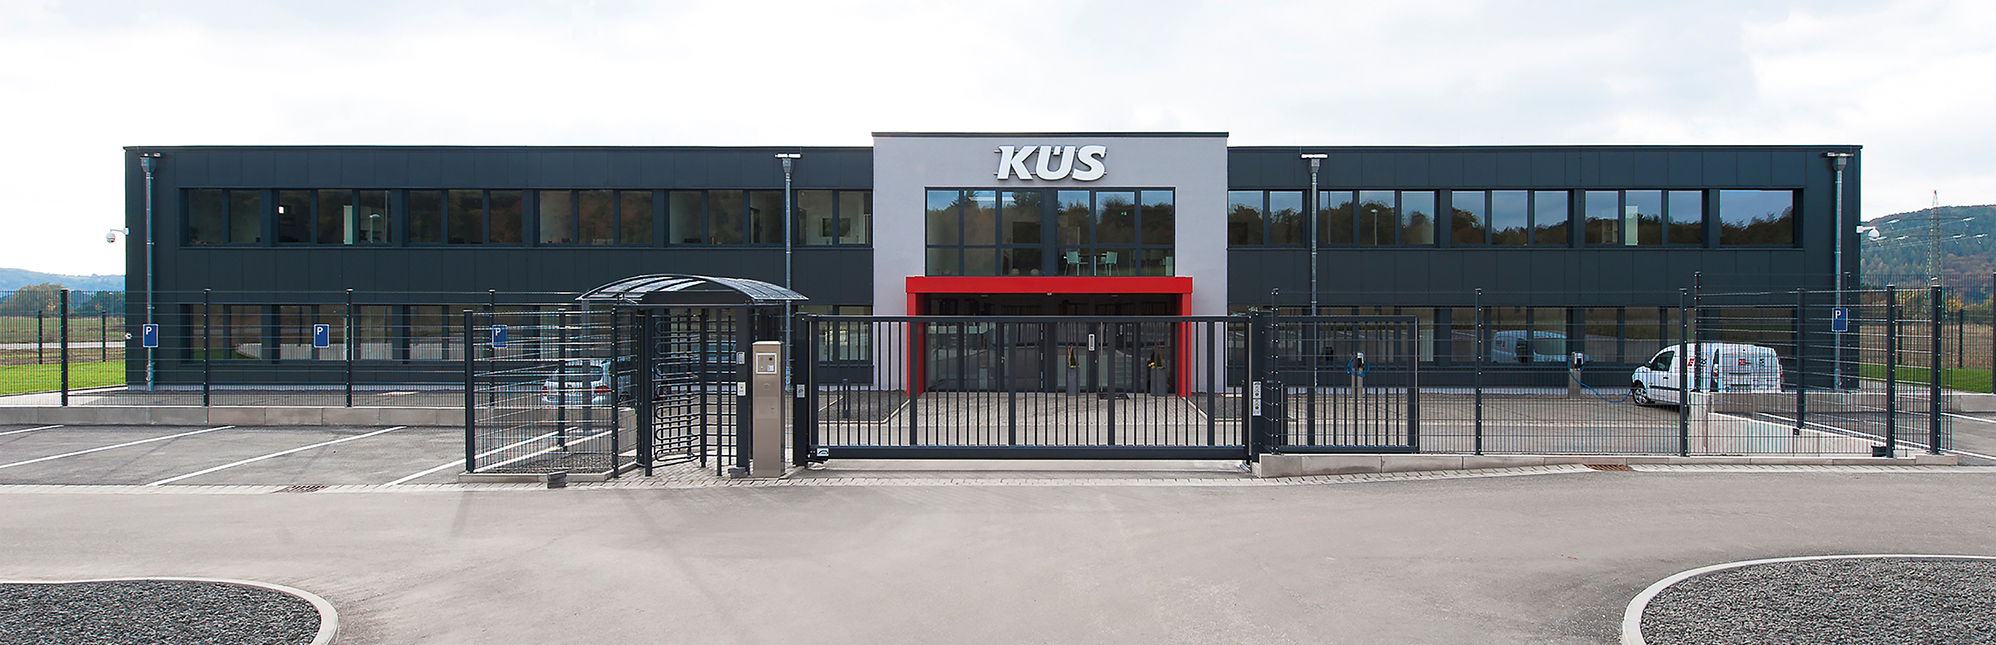 KÜS building from outside